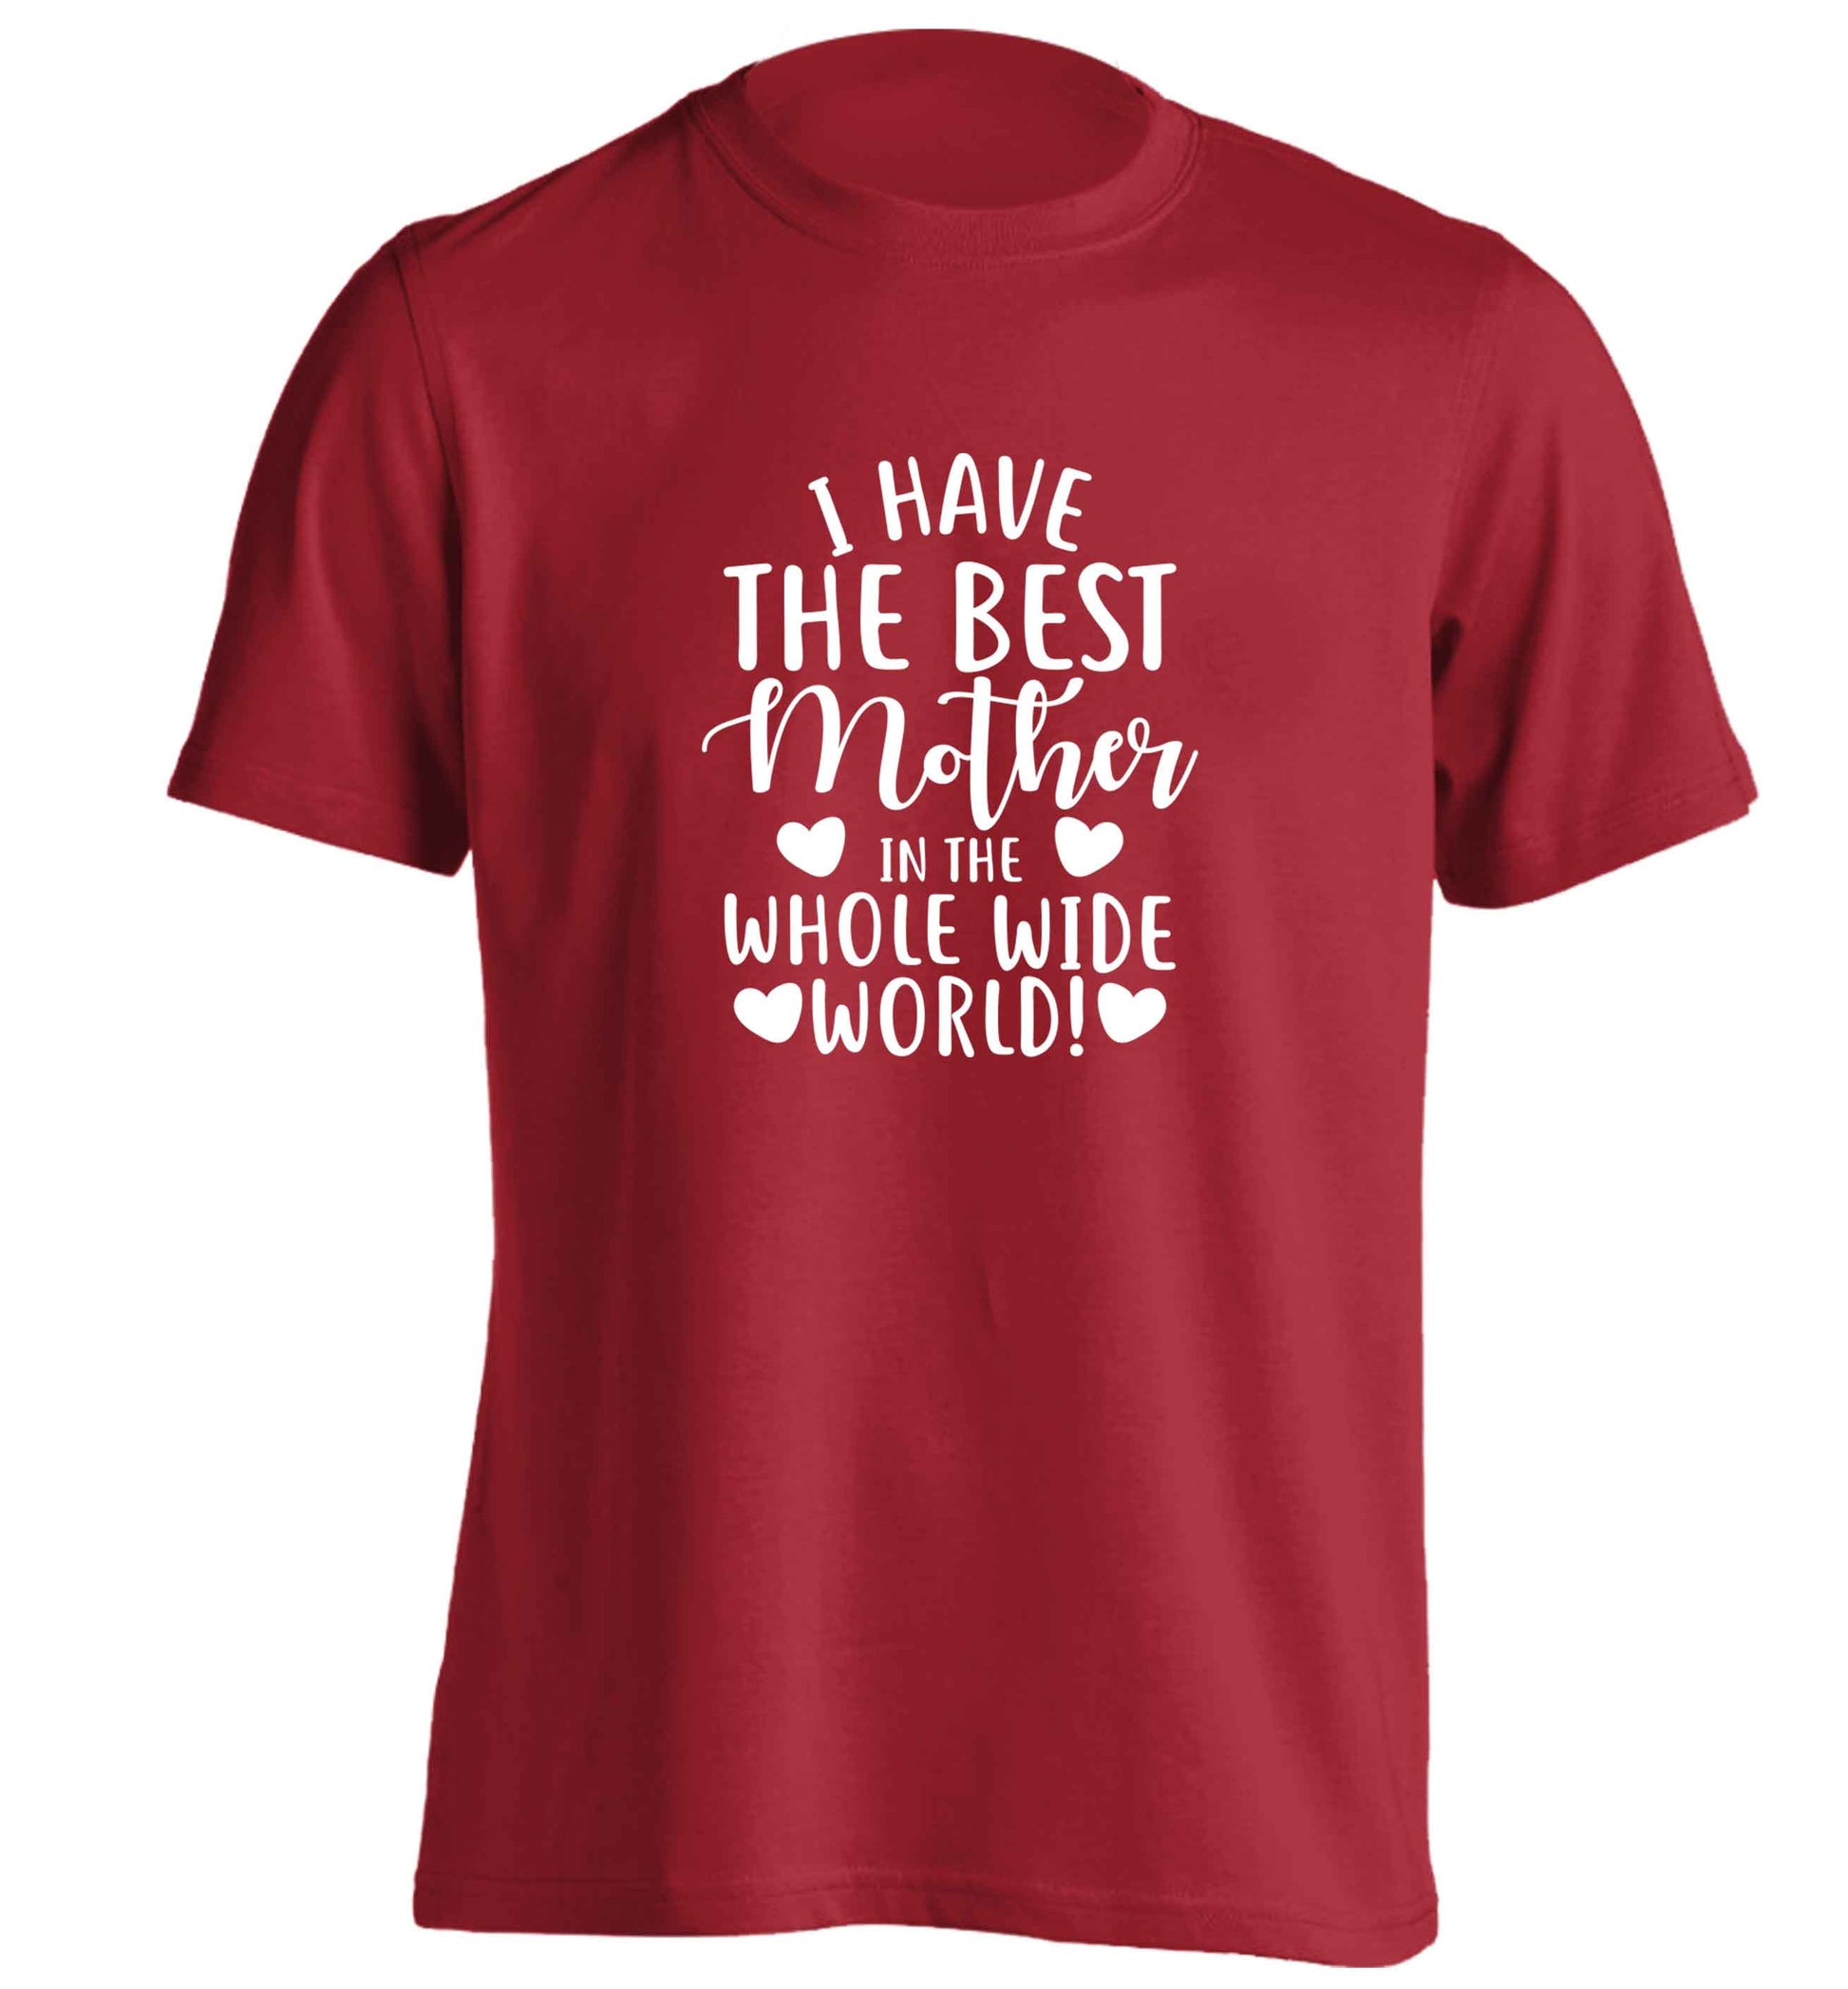 I have the best mother in the whole wide world adults unisex red Tshirt 2XL